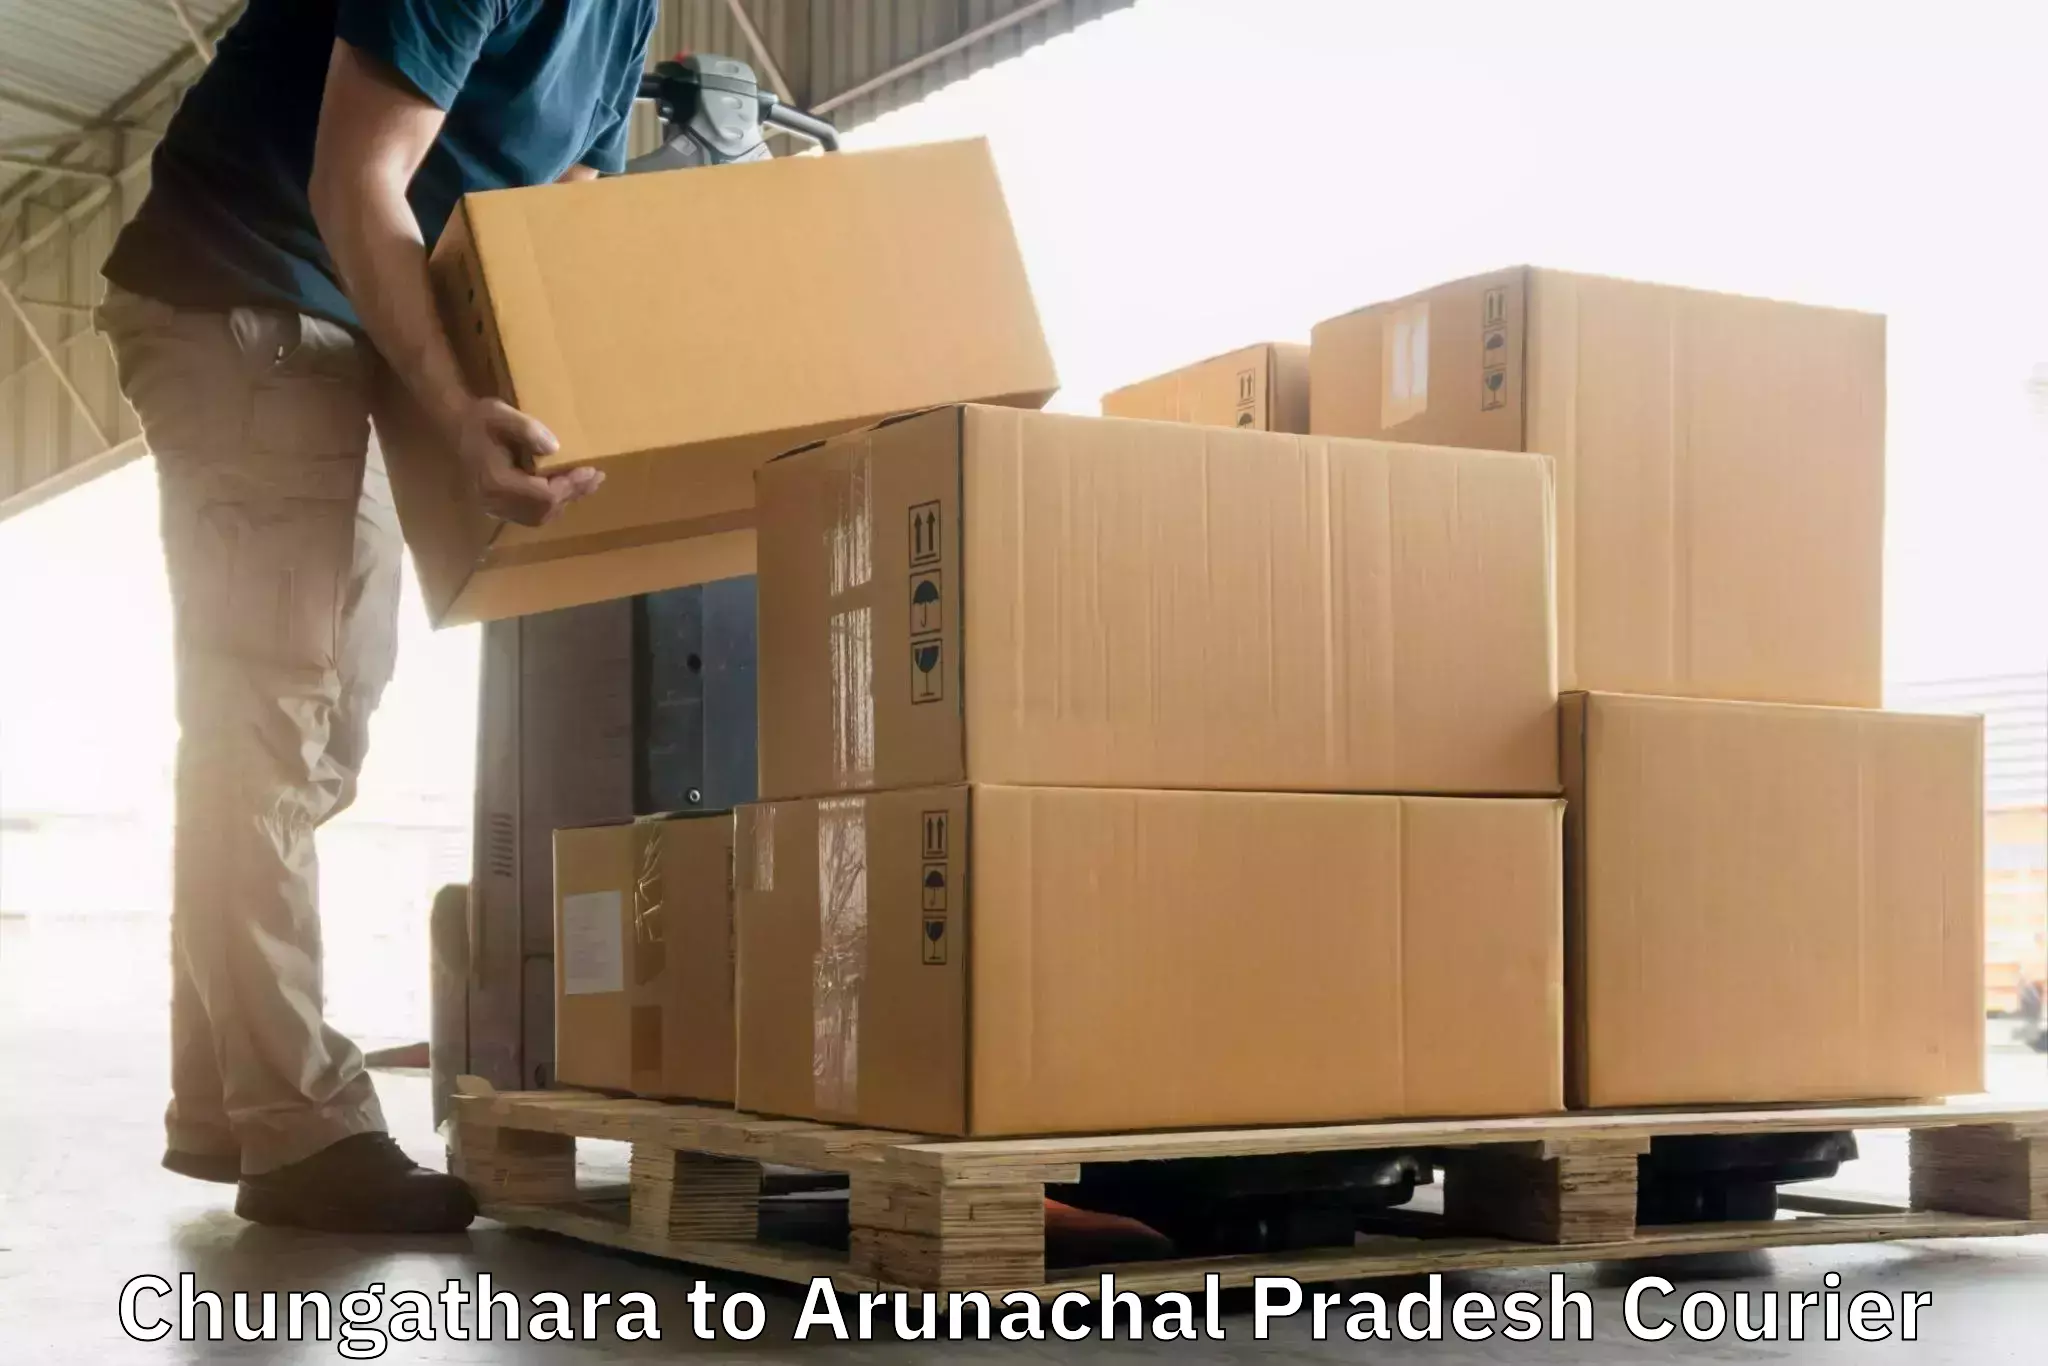 Express courier capabilities Chungathara to Aalo